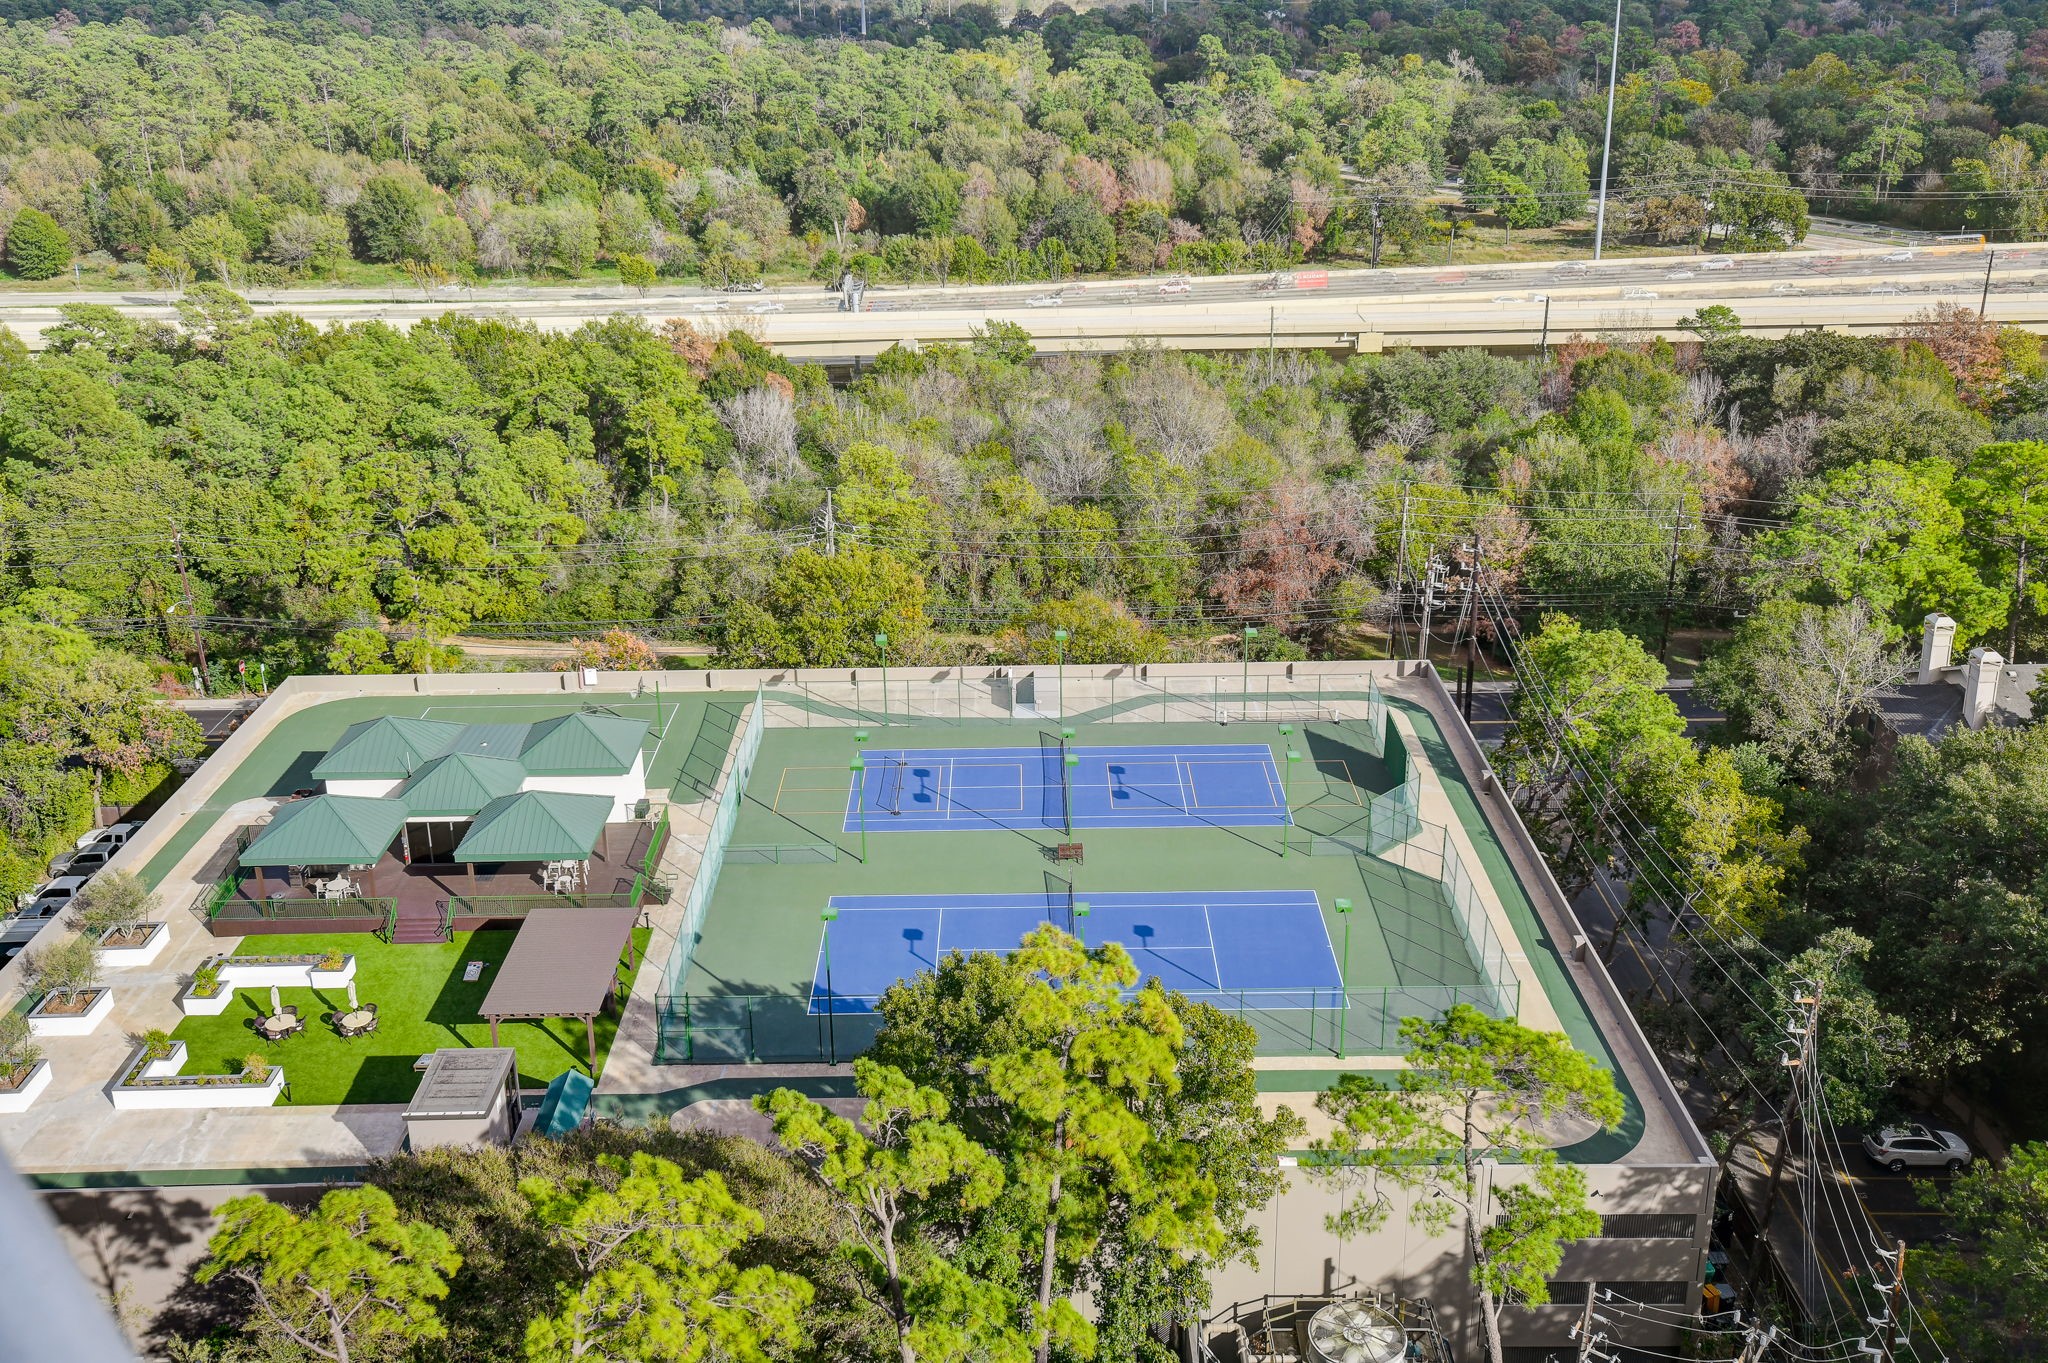 View of tennis courts from one of your private balconies